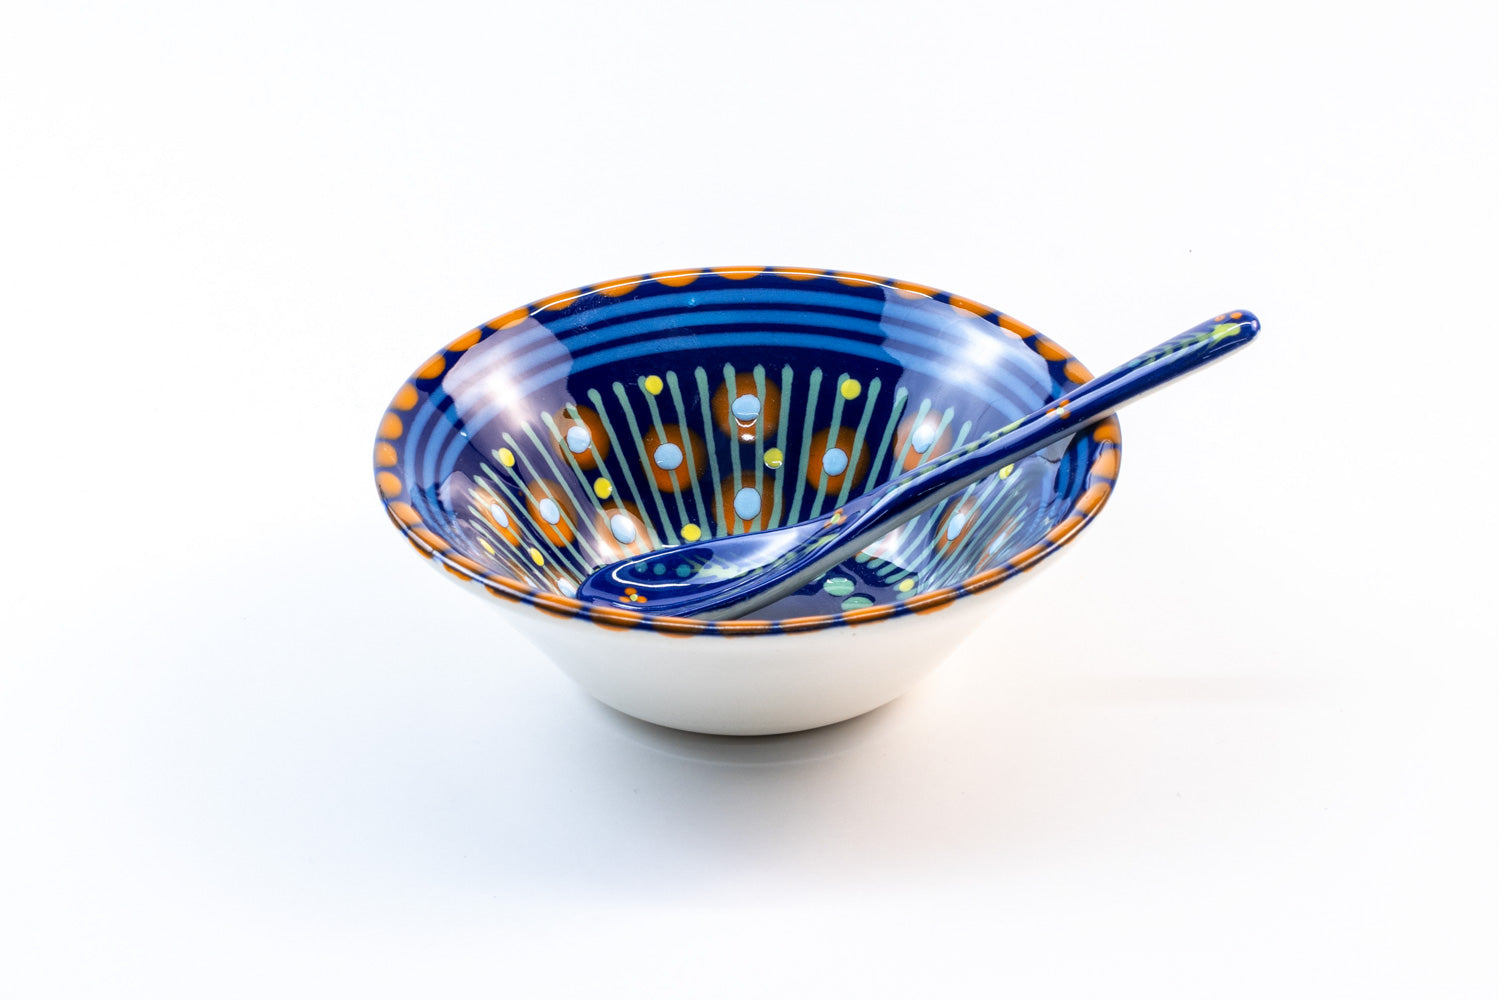 ndigo blue ceramic mini nut bowl with matching ceramic small spoon in Indigo Blue. Dots & Stripes on top of base color in orange, yellow, & turquoise and green. Perfect pair!